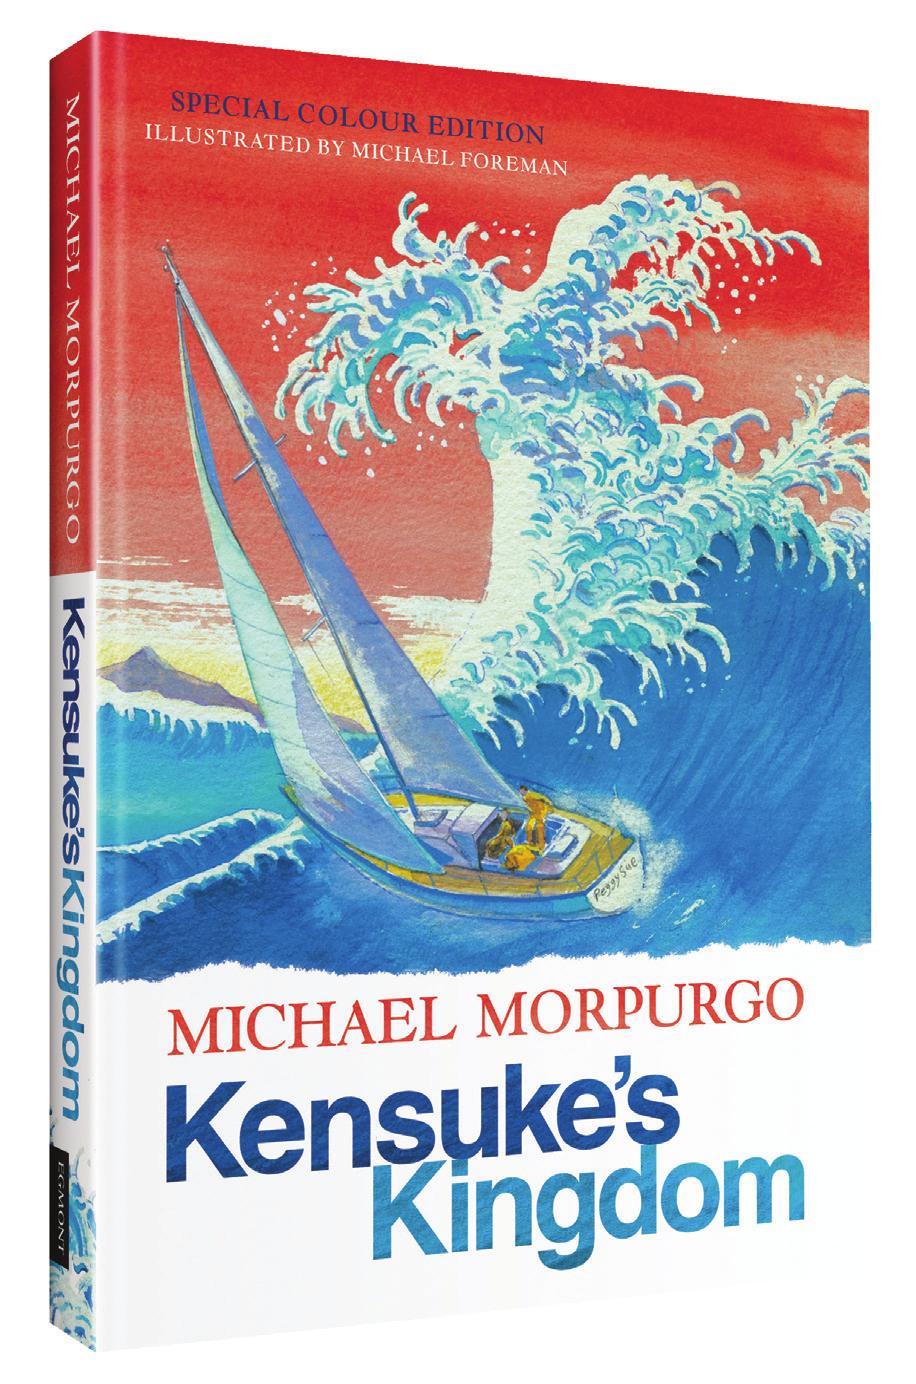 MICHAEL MORPURGO Kensuke s Kingdom by Michael Morpurgo About the Author The greater part of writing is daydreaming, dreaming the dream of my story, until it hatches out.